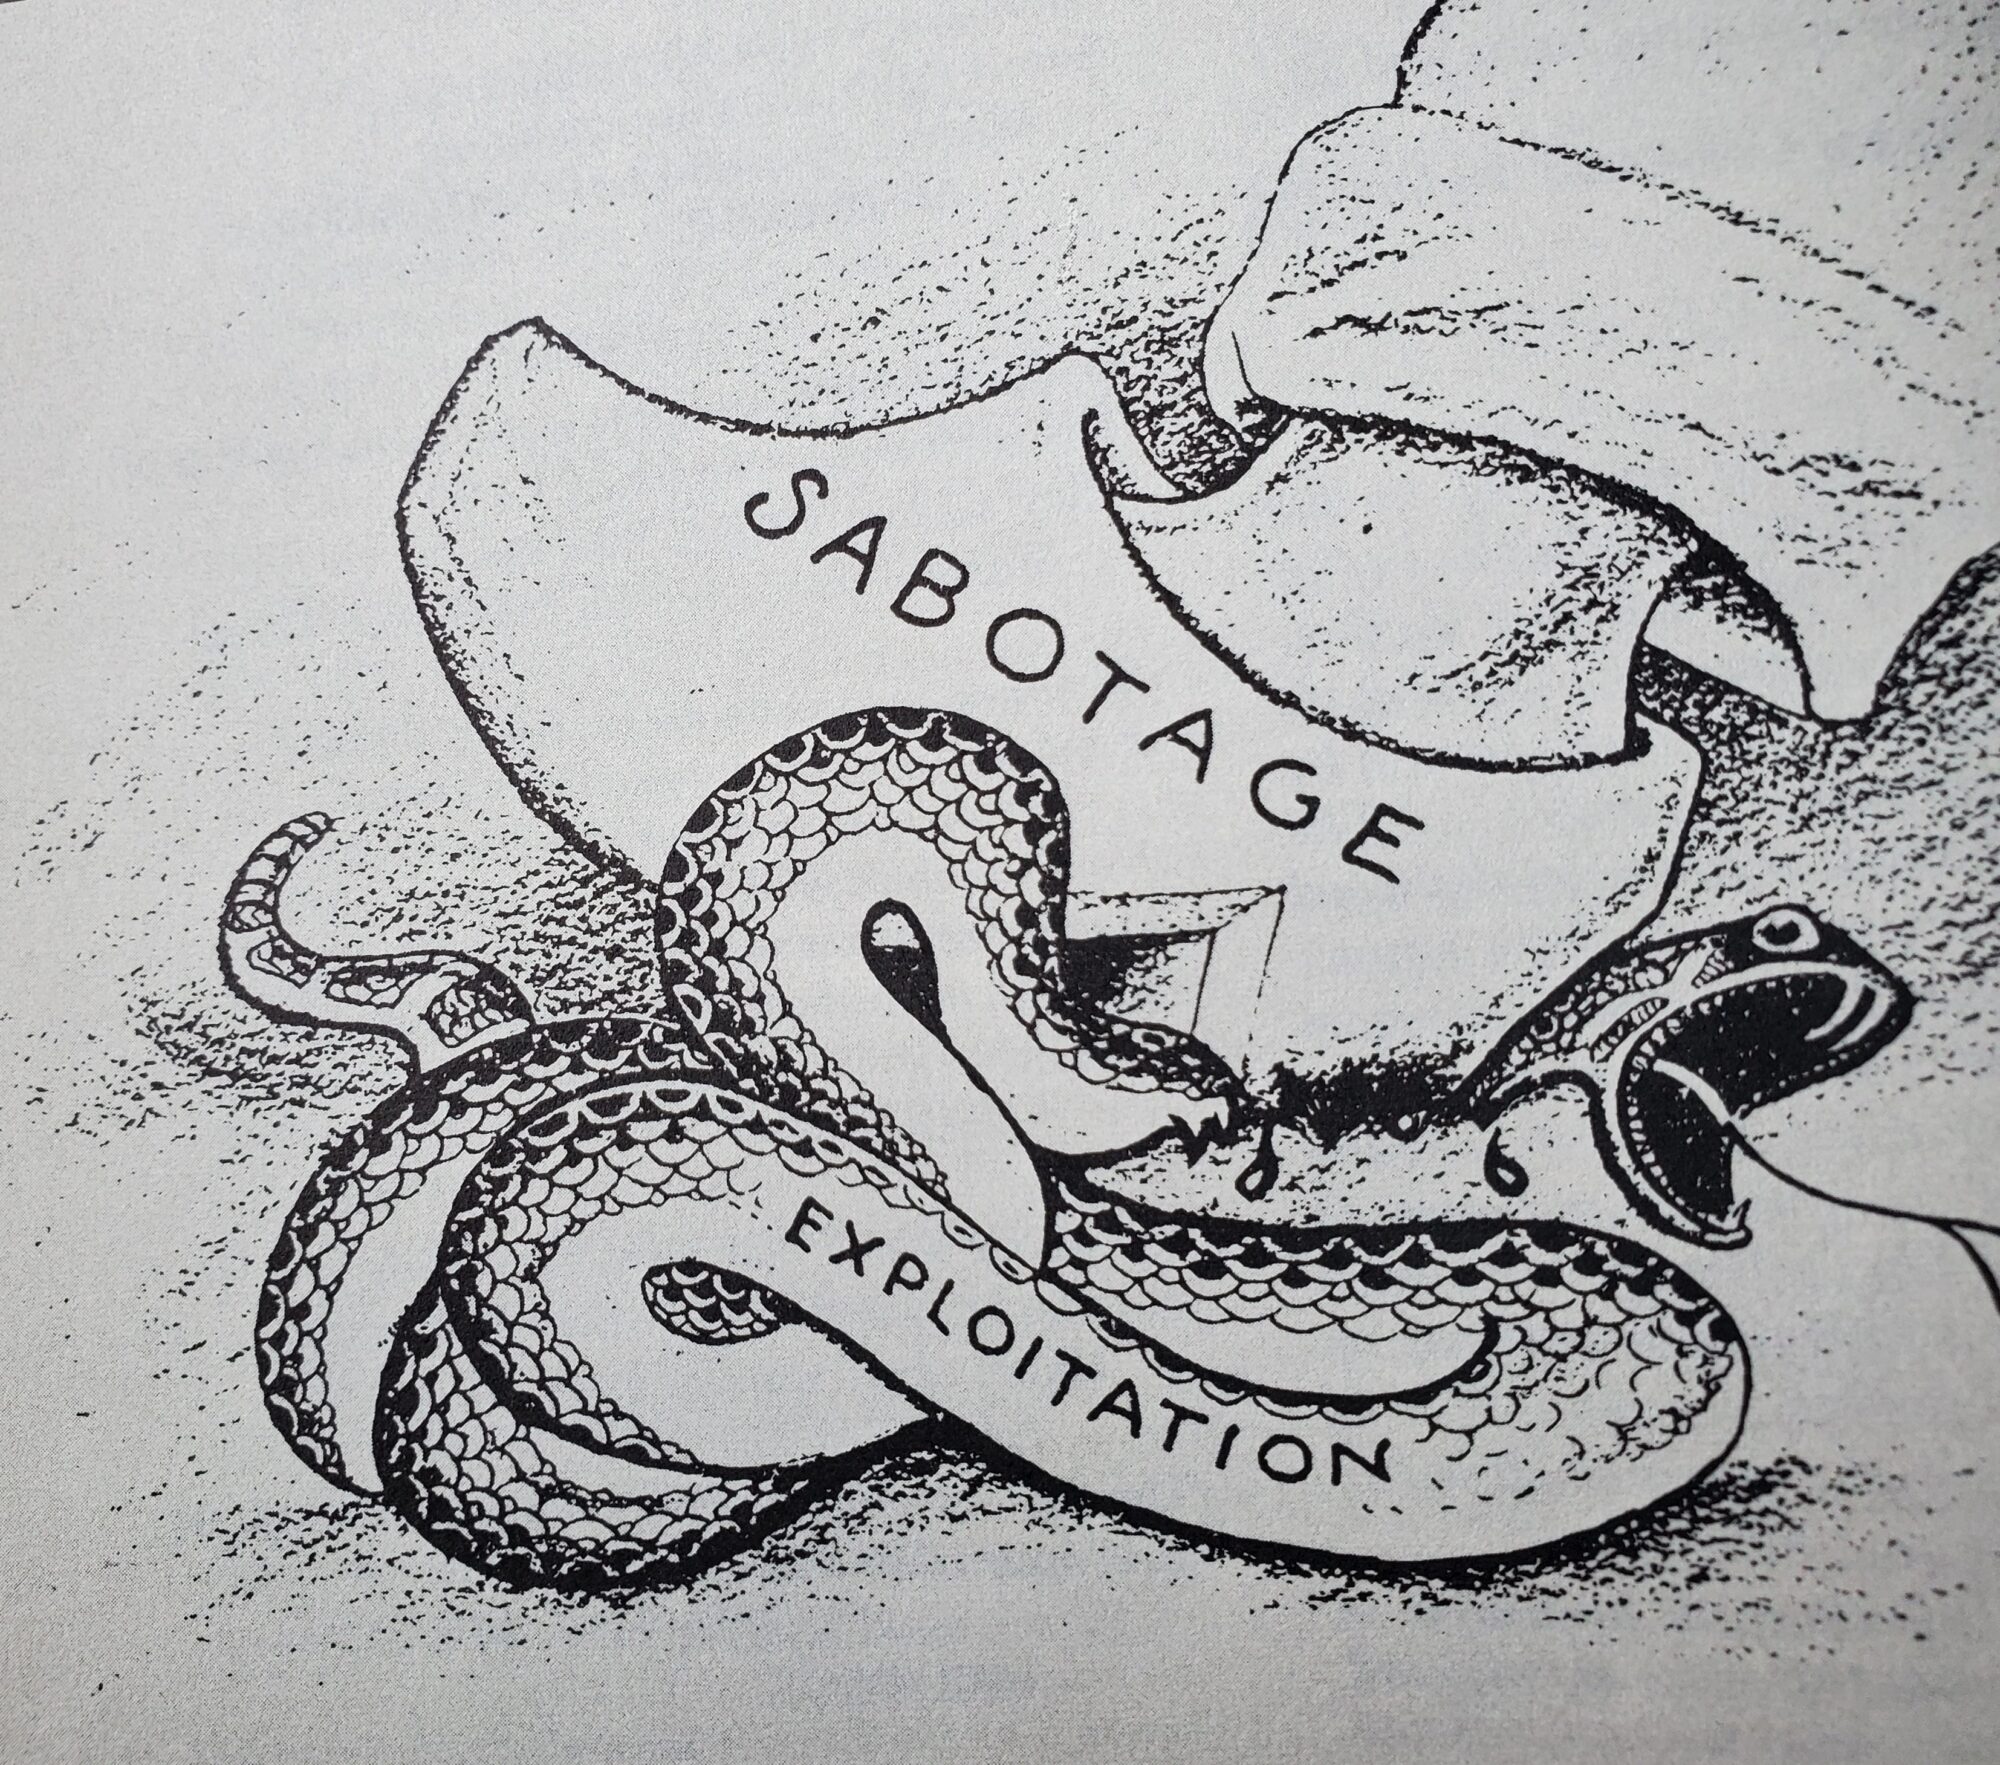 Labor History April 25, Direct action gets the goods. IWW sabot crushing the snake of exploitation.